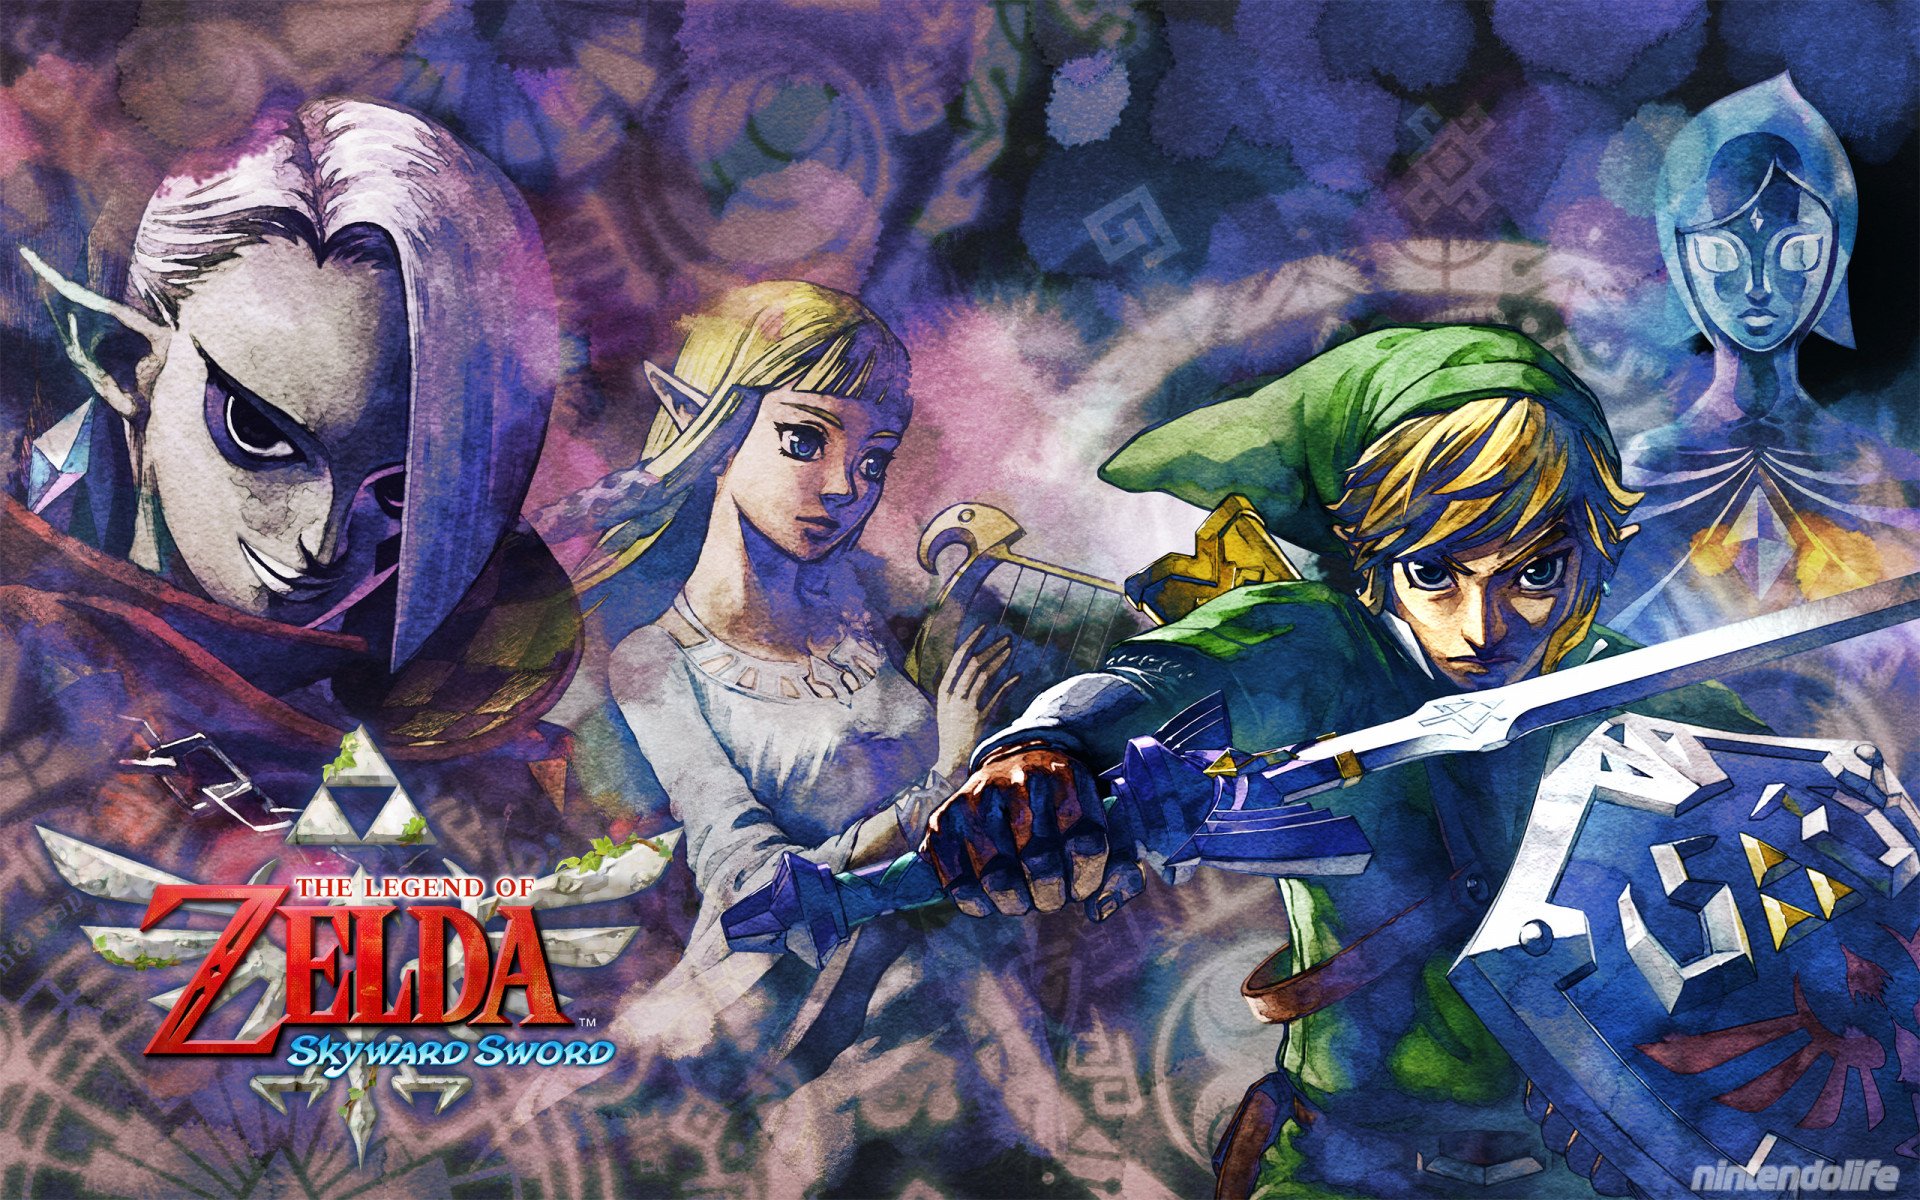 Out Today: The Legend of Zelda: Skyward Sword and Wallpaper